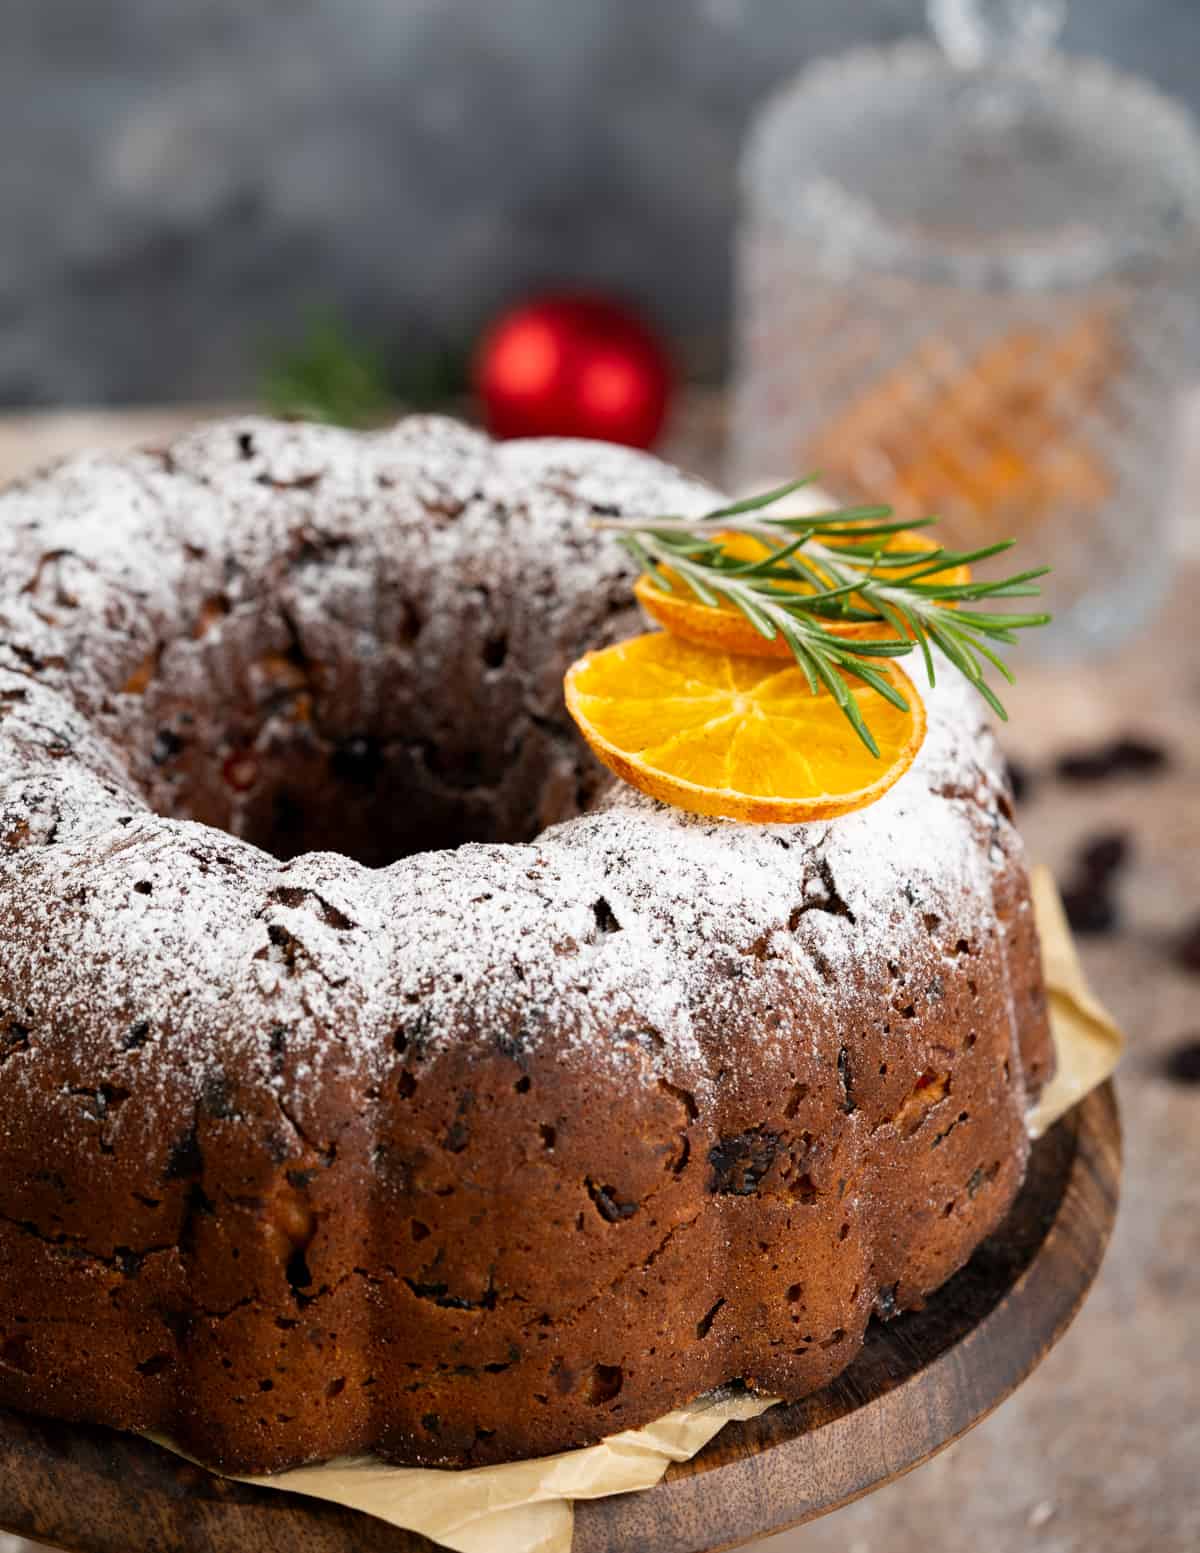 Classic Fruit cake is loaded with dried fruits(lots of them), nuts, and warm spices. This holiday cake has a beautifully dense moist crumb. Perfect for gifting or as a centerpiece on the holiday table.  